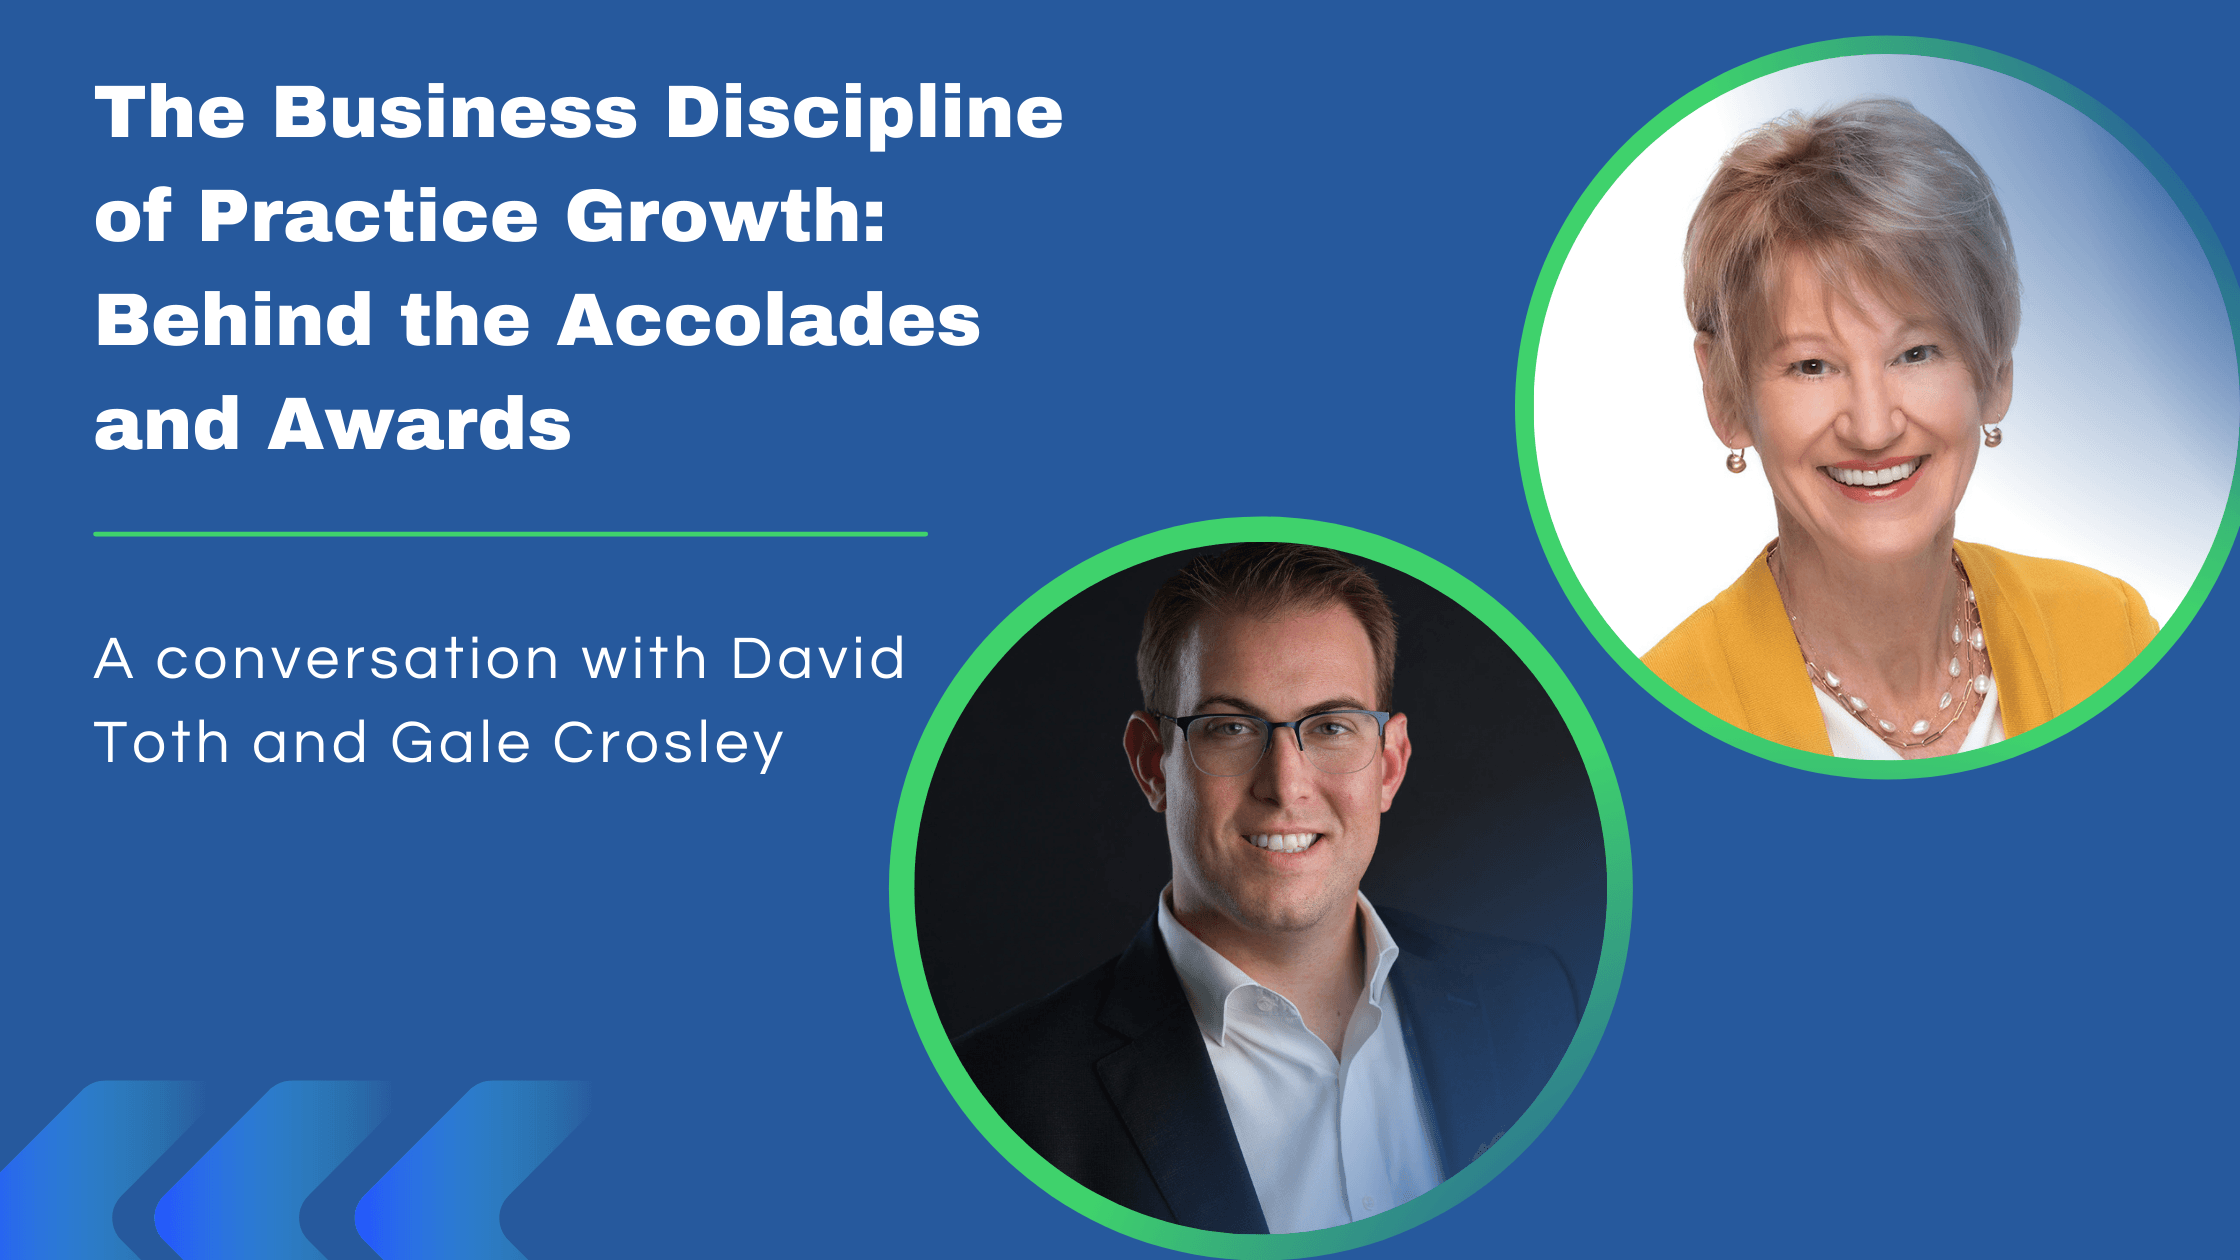 The Business Discipline of Practice Growth: Behind the Accolades and Awards